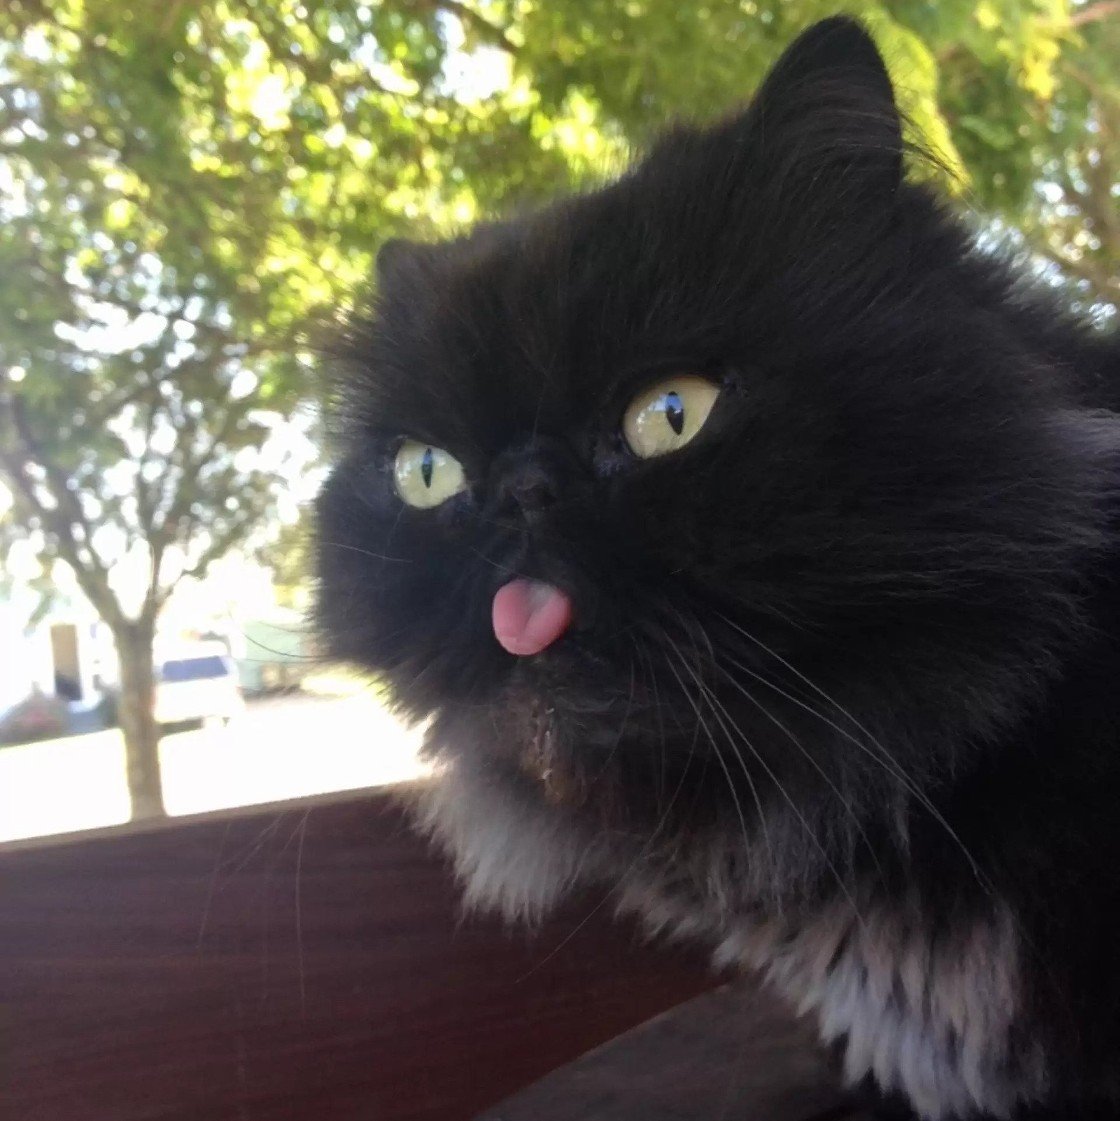 15 Cats Are Sticking Their Tongues Out At You… And For Good Reason!